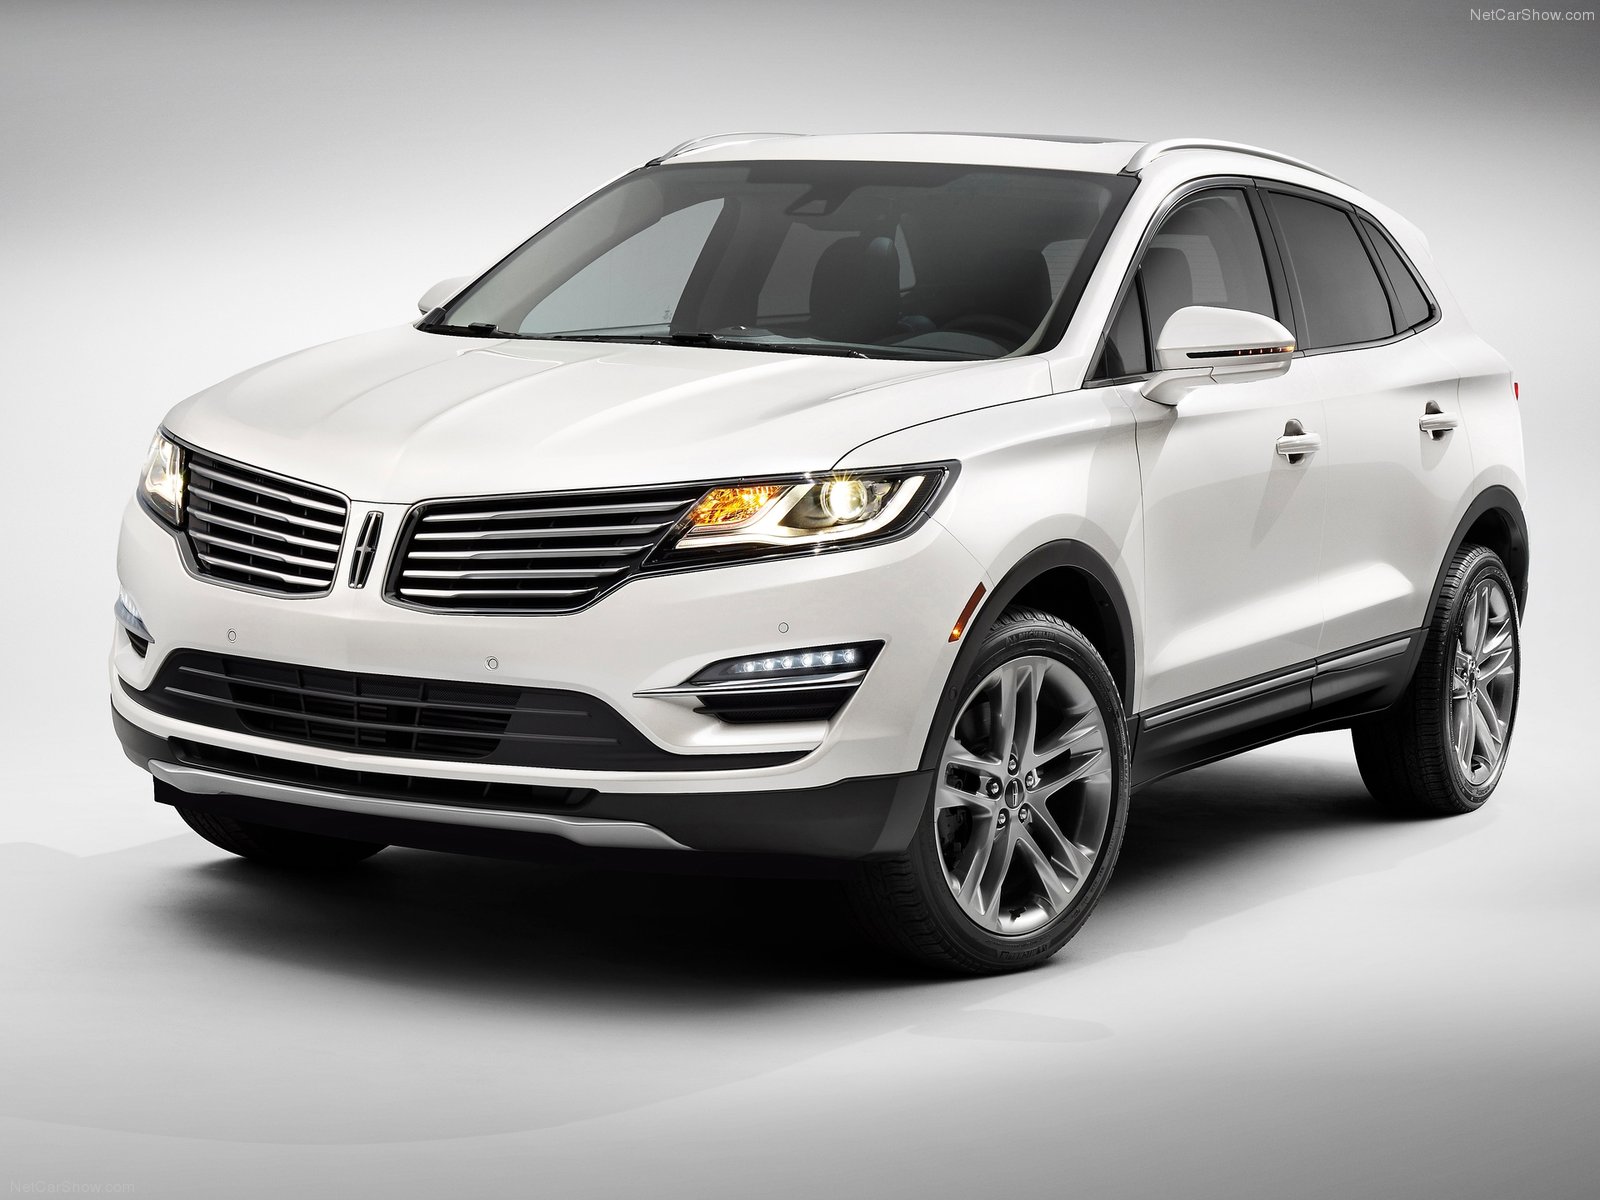 2015 Lincoln MKX #7